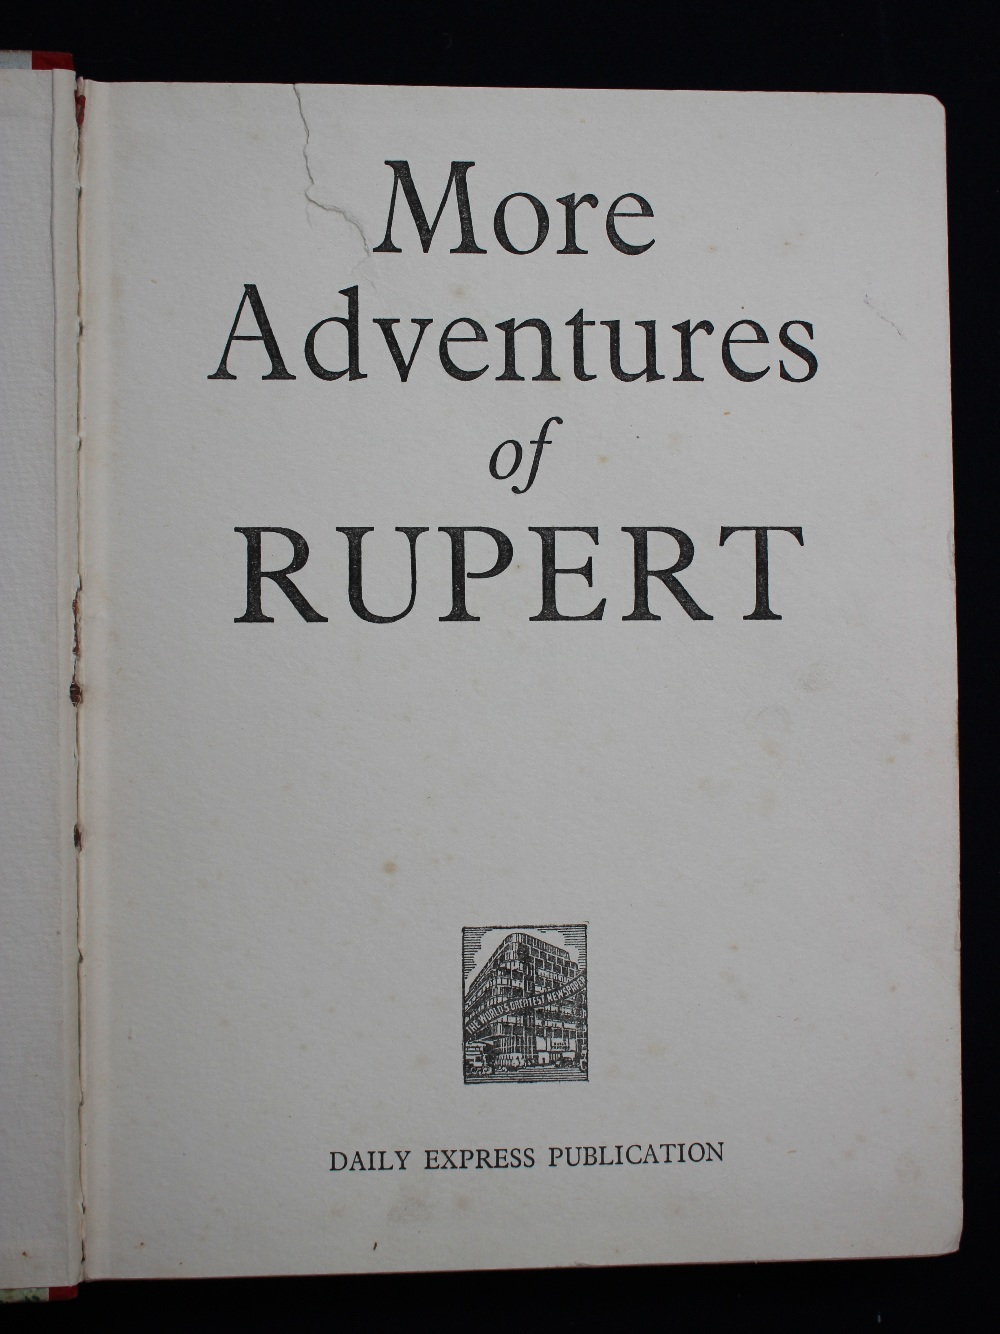 Mary Tourtel 'More Adventures of Rupert' 1937. First story Rupert and the Snow Machine.